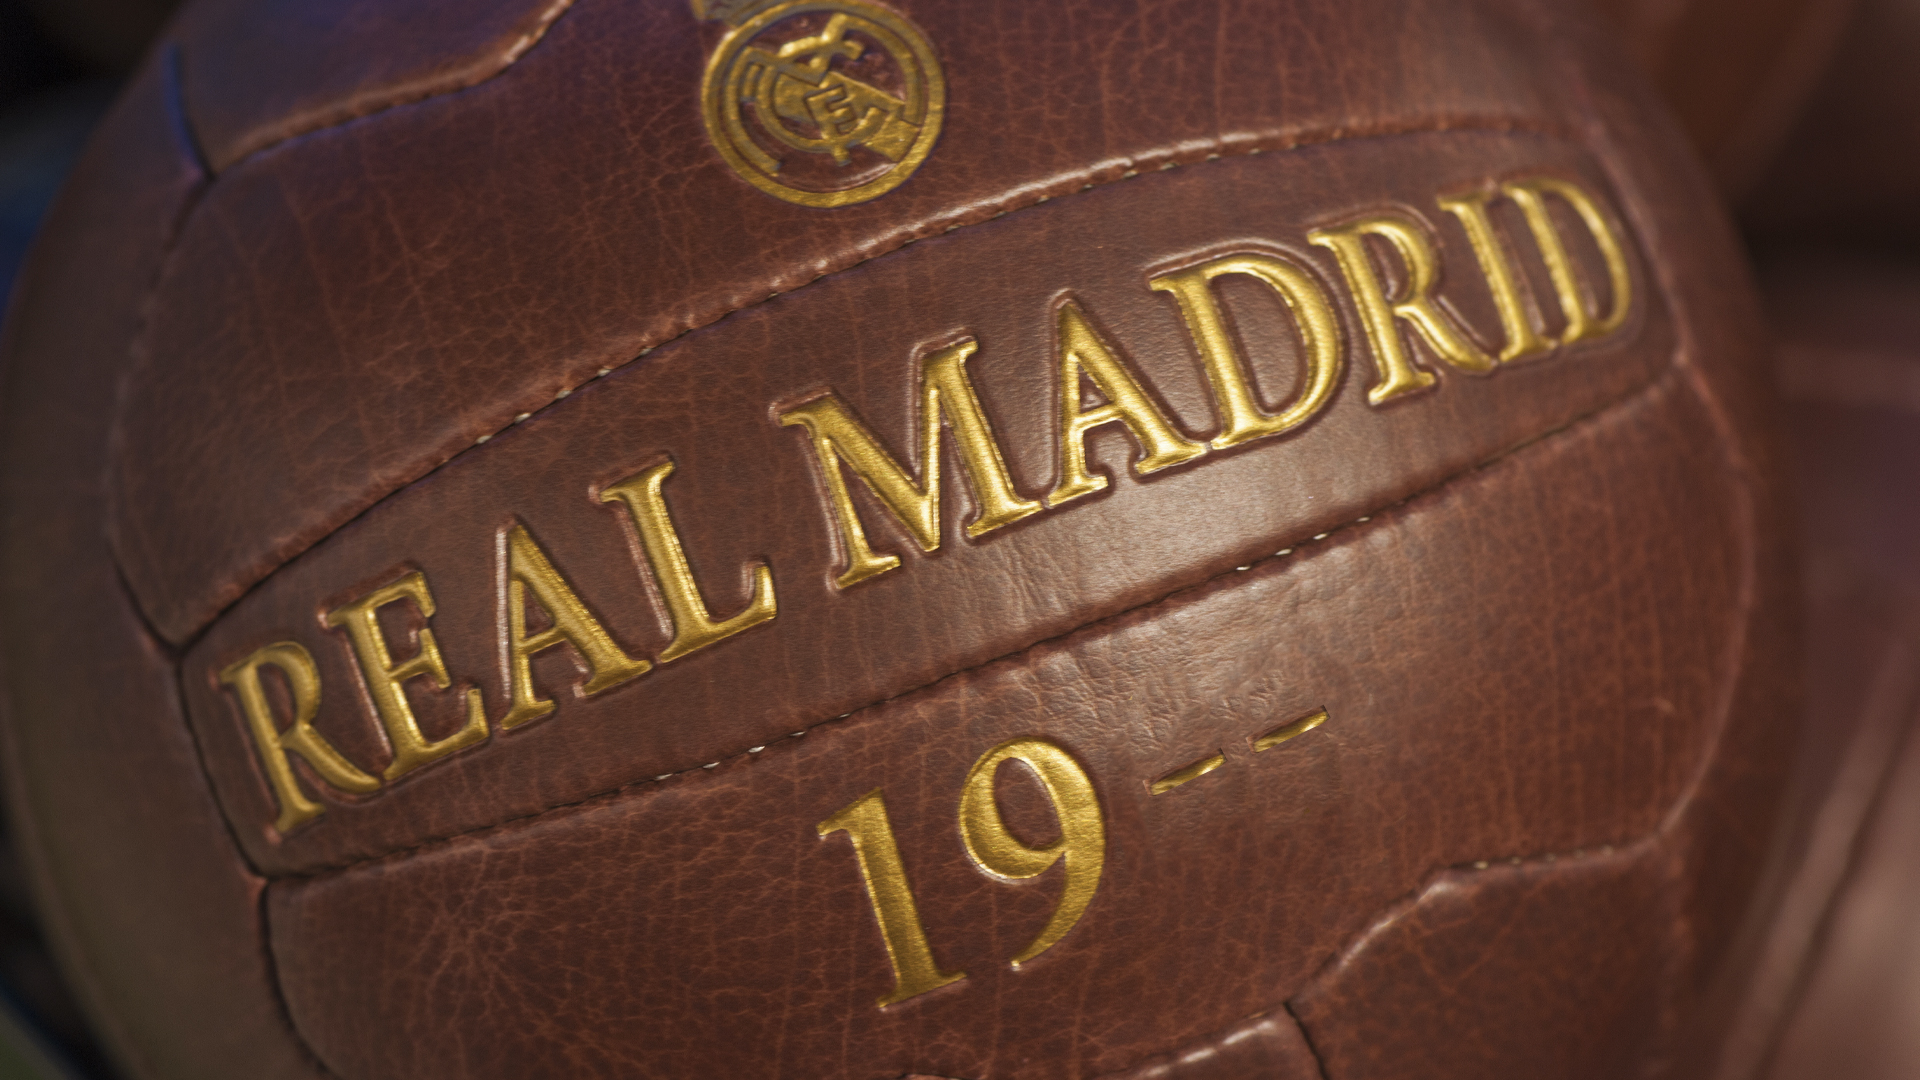 An old Real Madrid leather football with gold writing